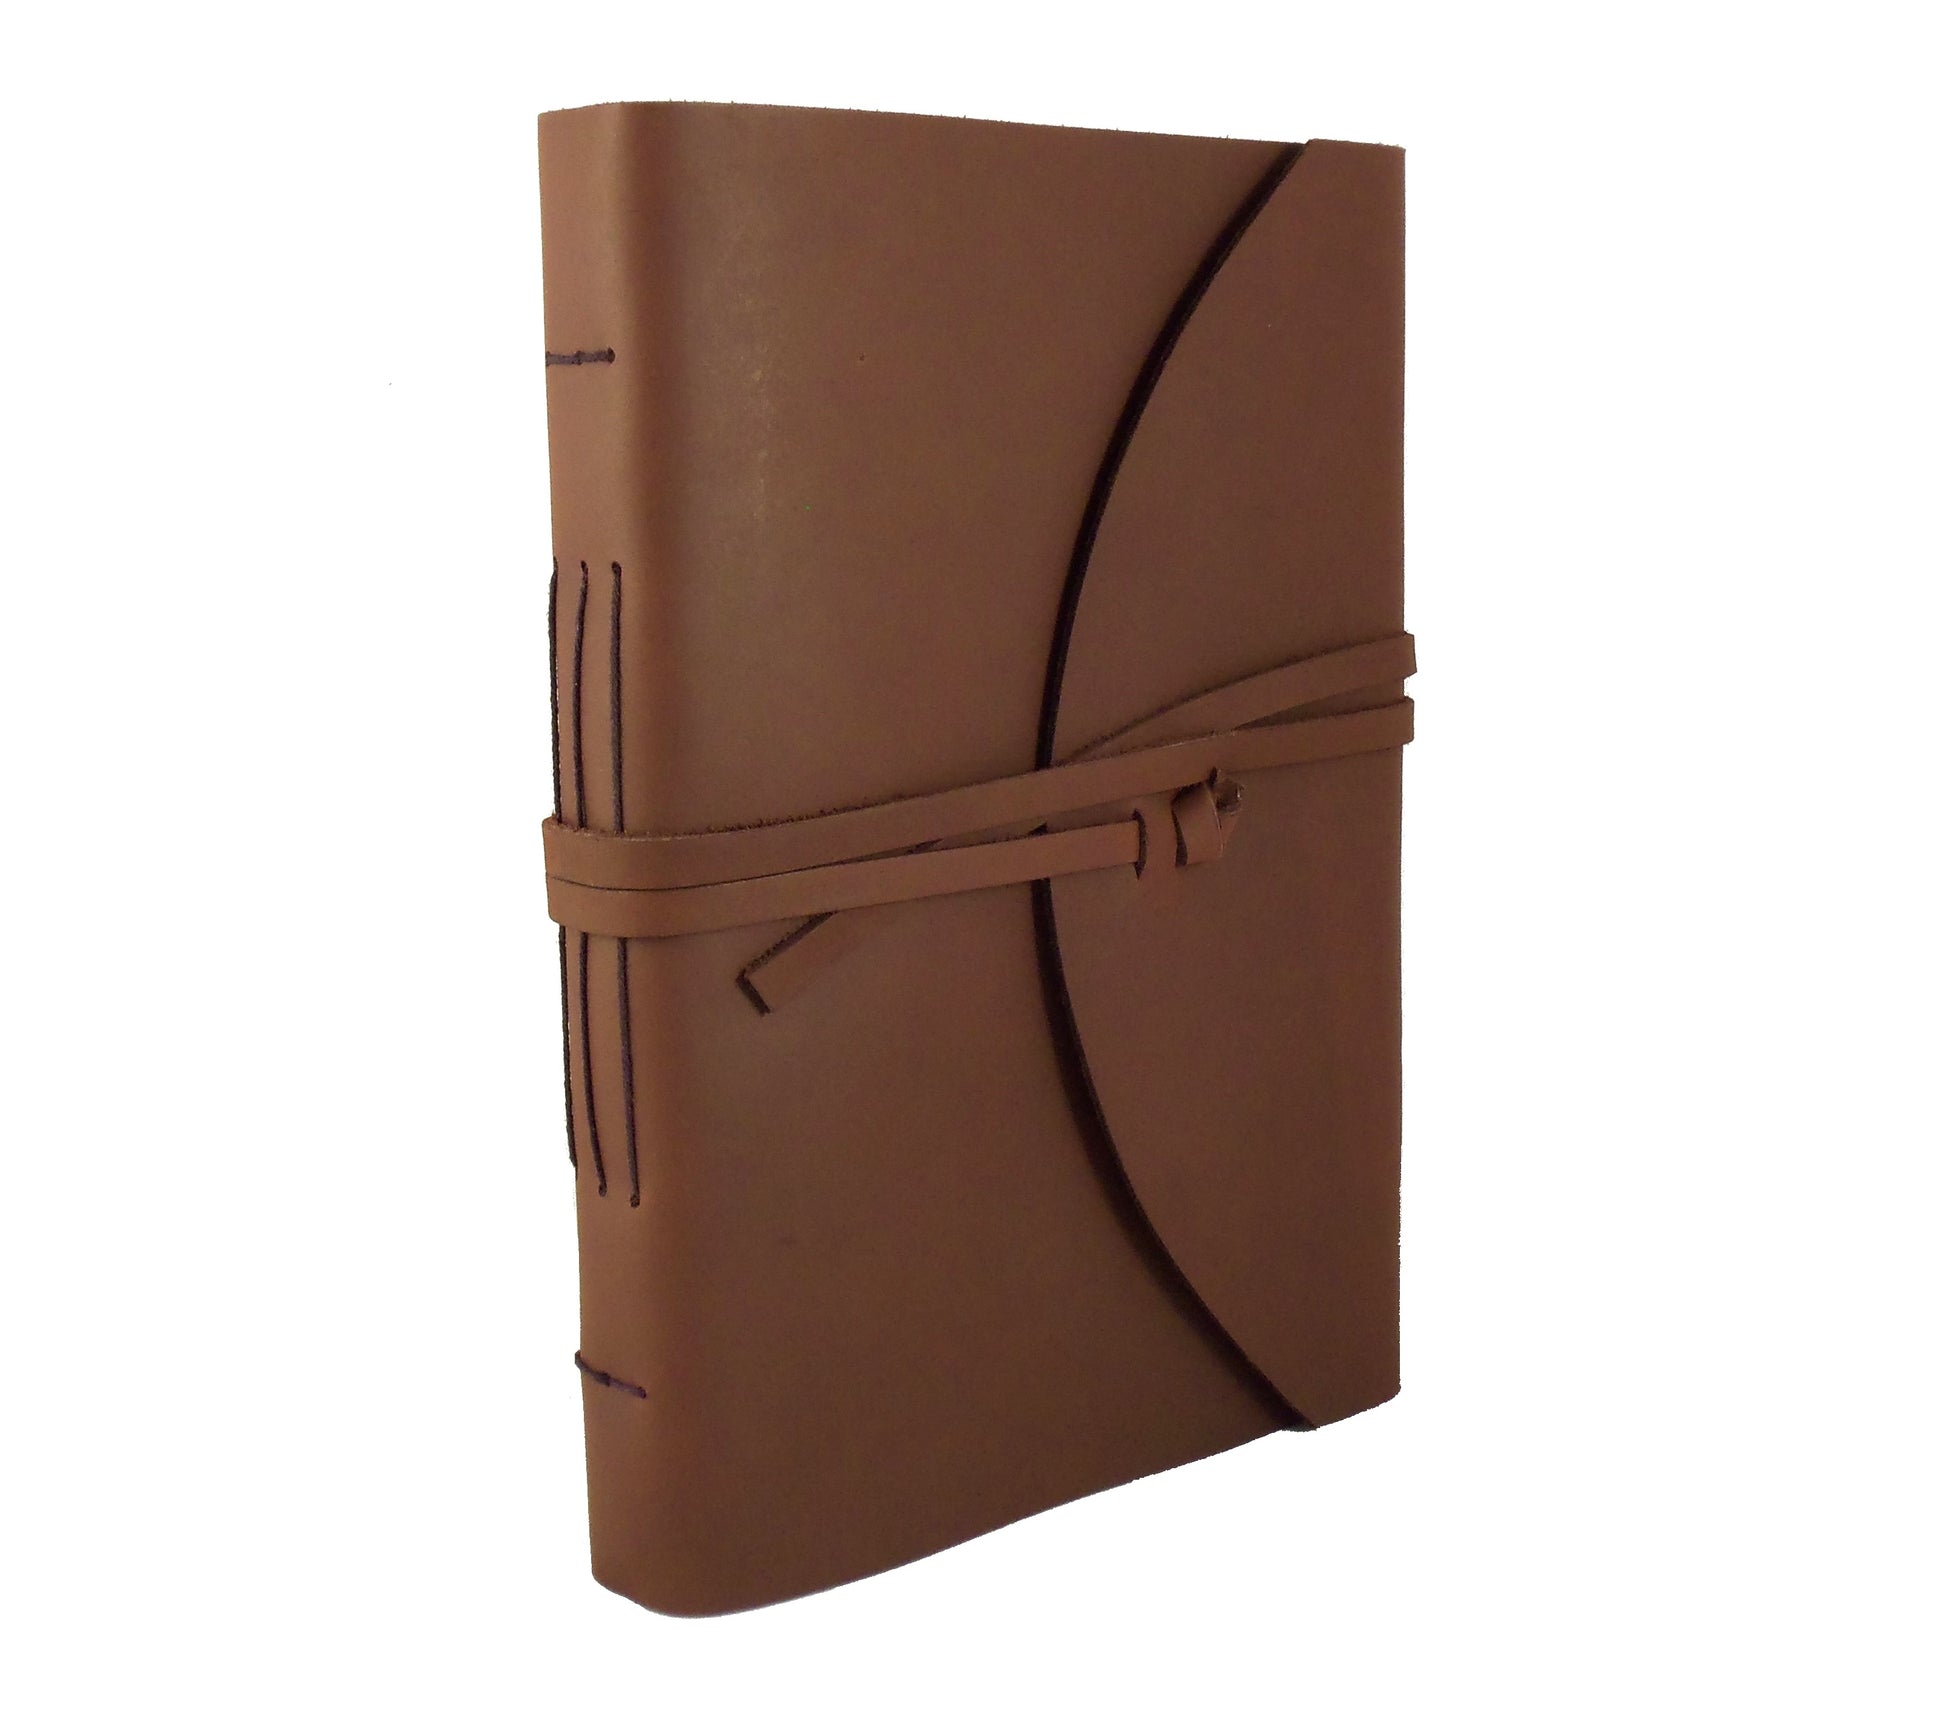 Large Genuine Leather Legacy Journal / Sketchbook with Gift Box - 380 Pages - 9x12" - Rustic Ridge Leather